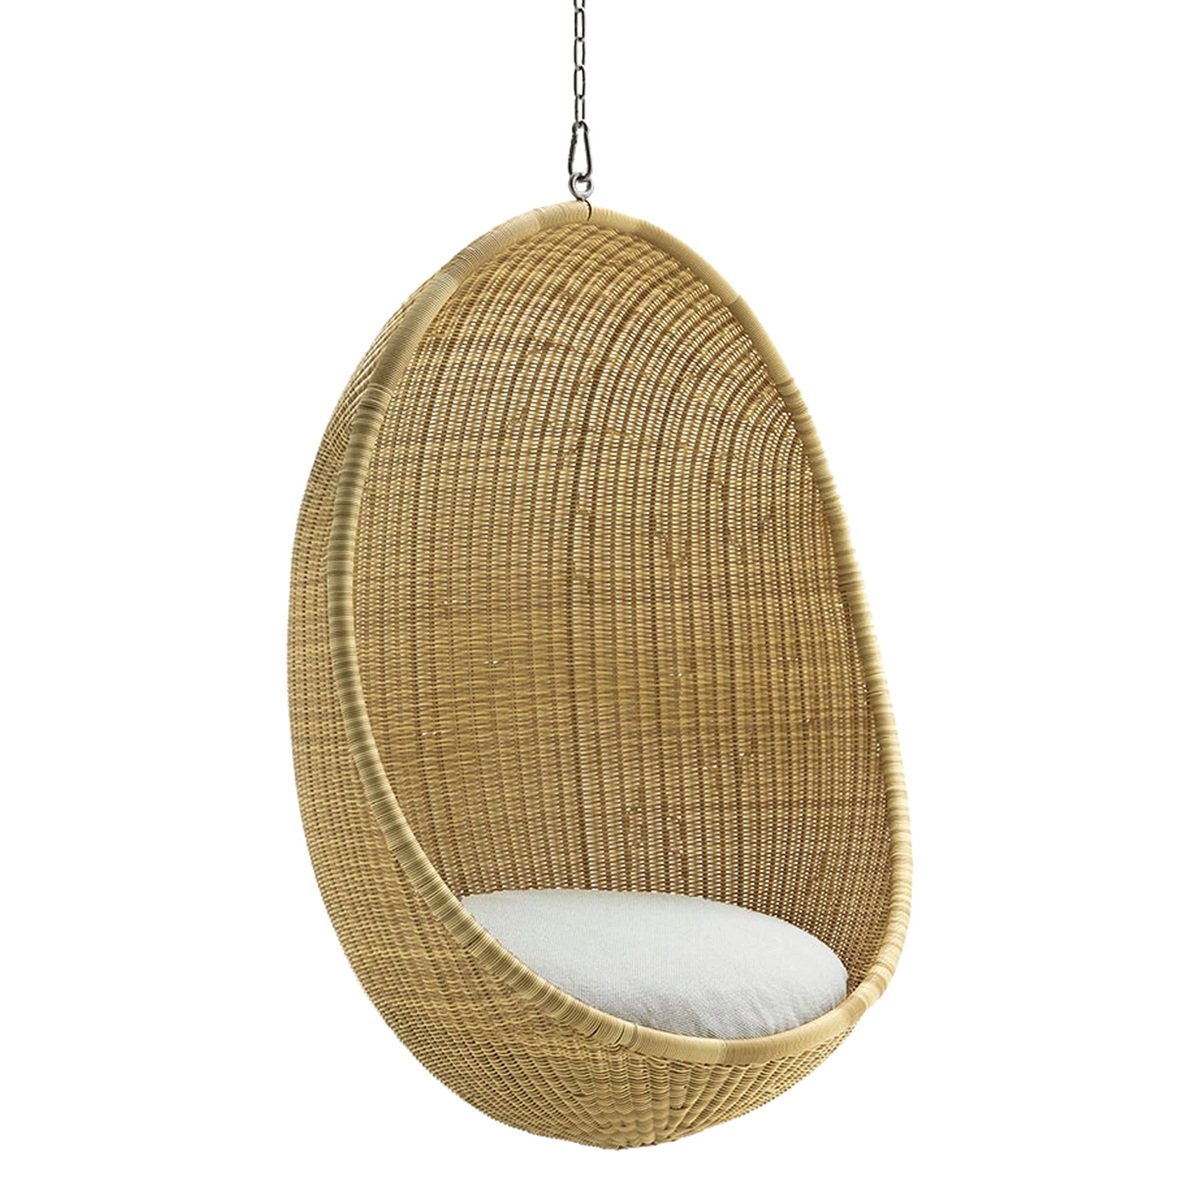 Sika Design Hanging Egg Exterior Chair, How Much Does A Hanging Egg Chair Cost In Philippines